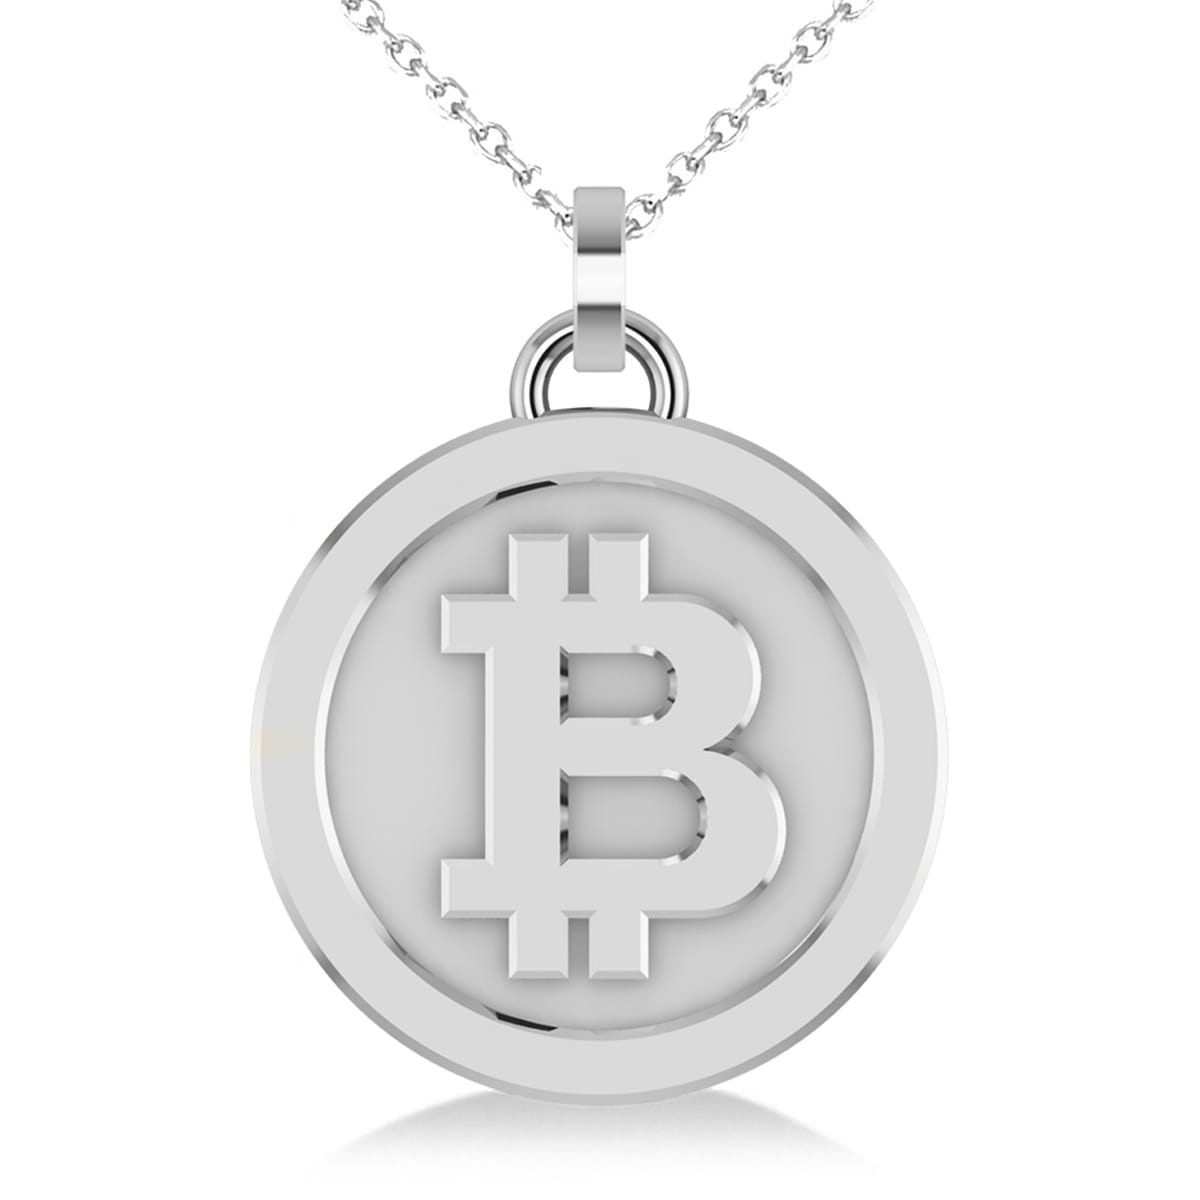 Medium Cryptocurrency Bitcoin Pendant Necklace 14k White Gold